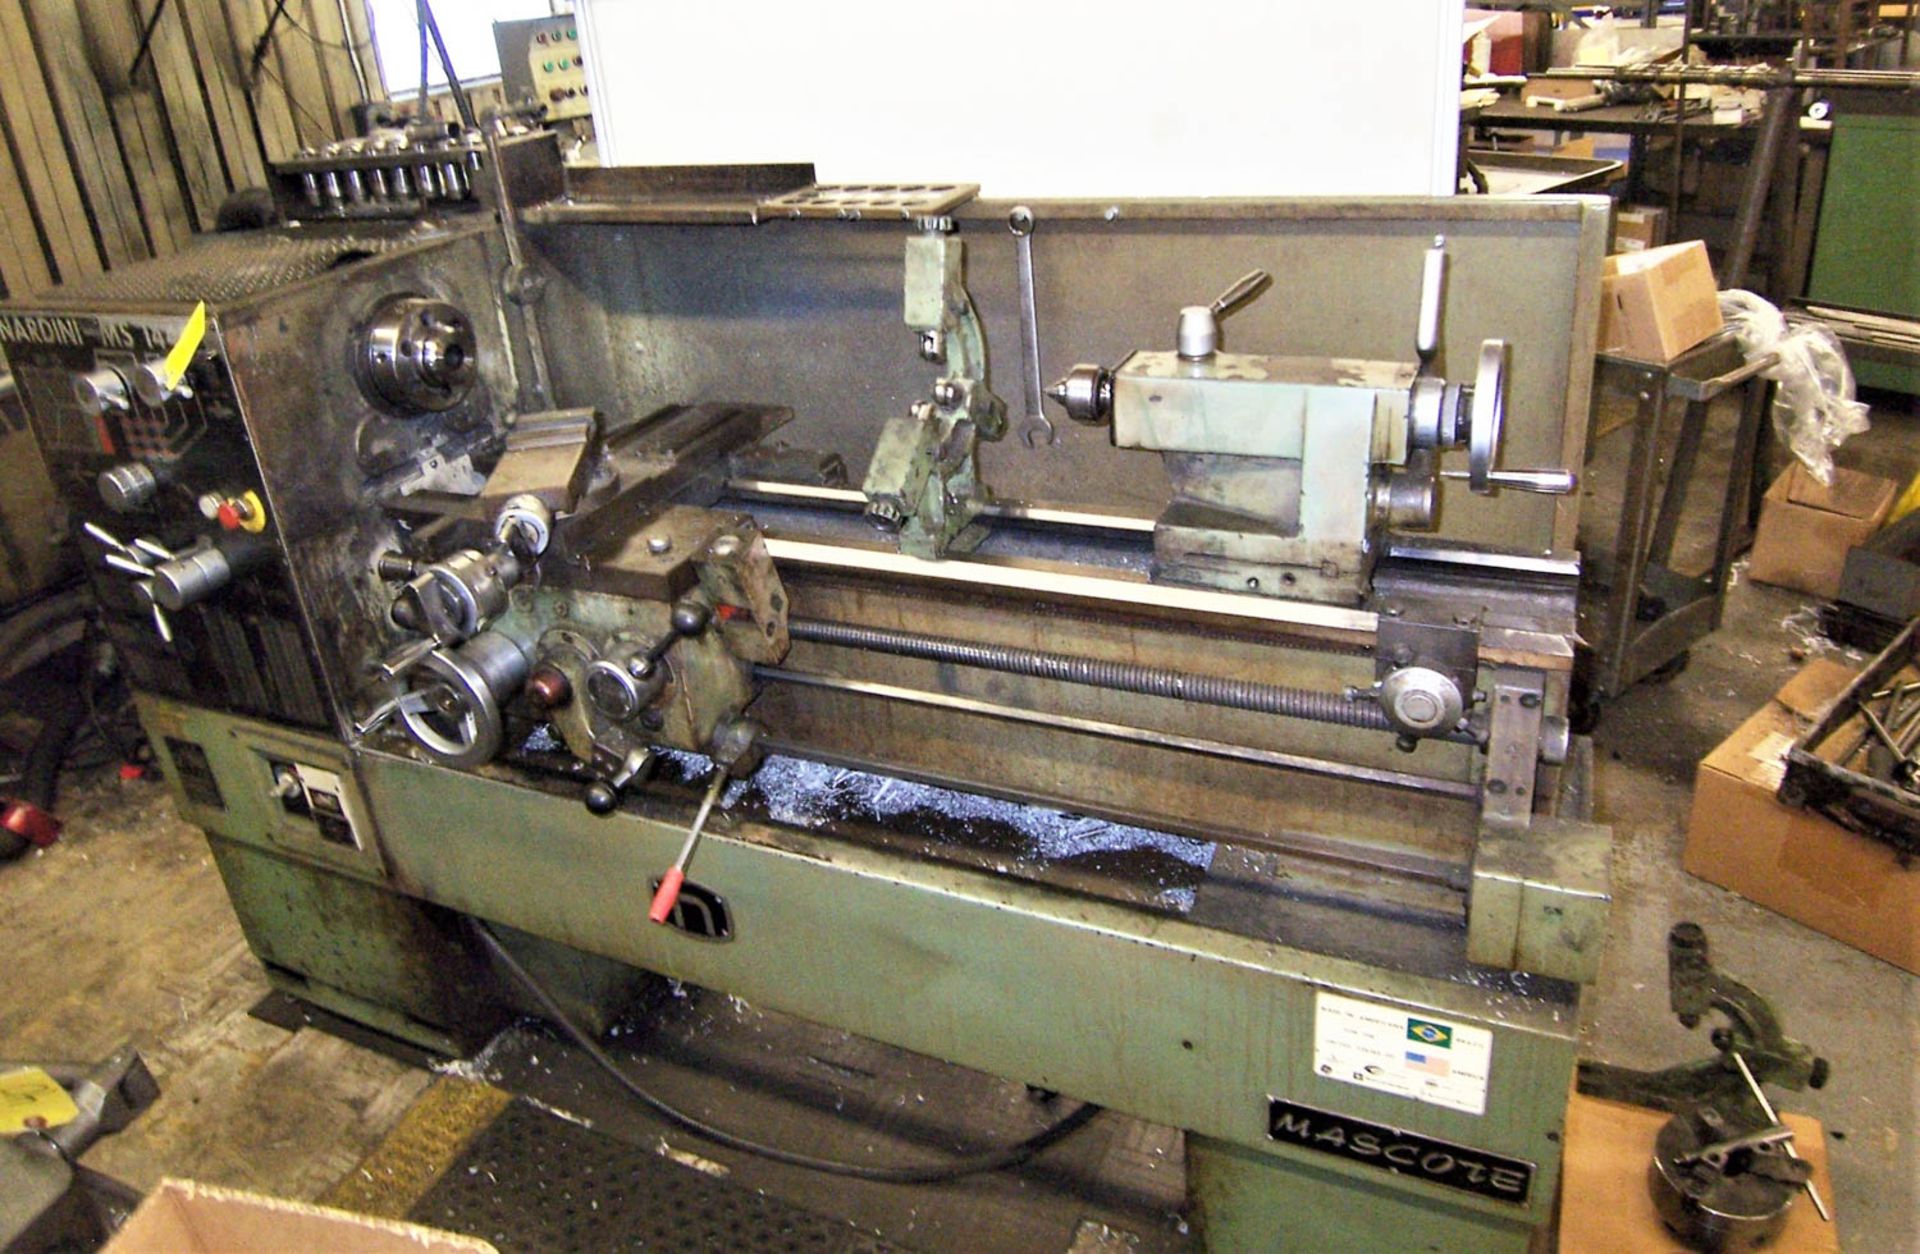 14" X X40" NARDINI MDL. MS1440E "MASCOTE" GAP BED LATHE, WITH 25-2000 RPM SPINDLE SPEEDS, INCH / - Image 2 of 4